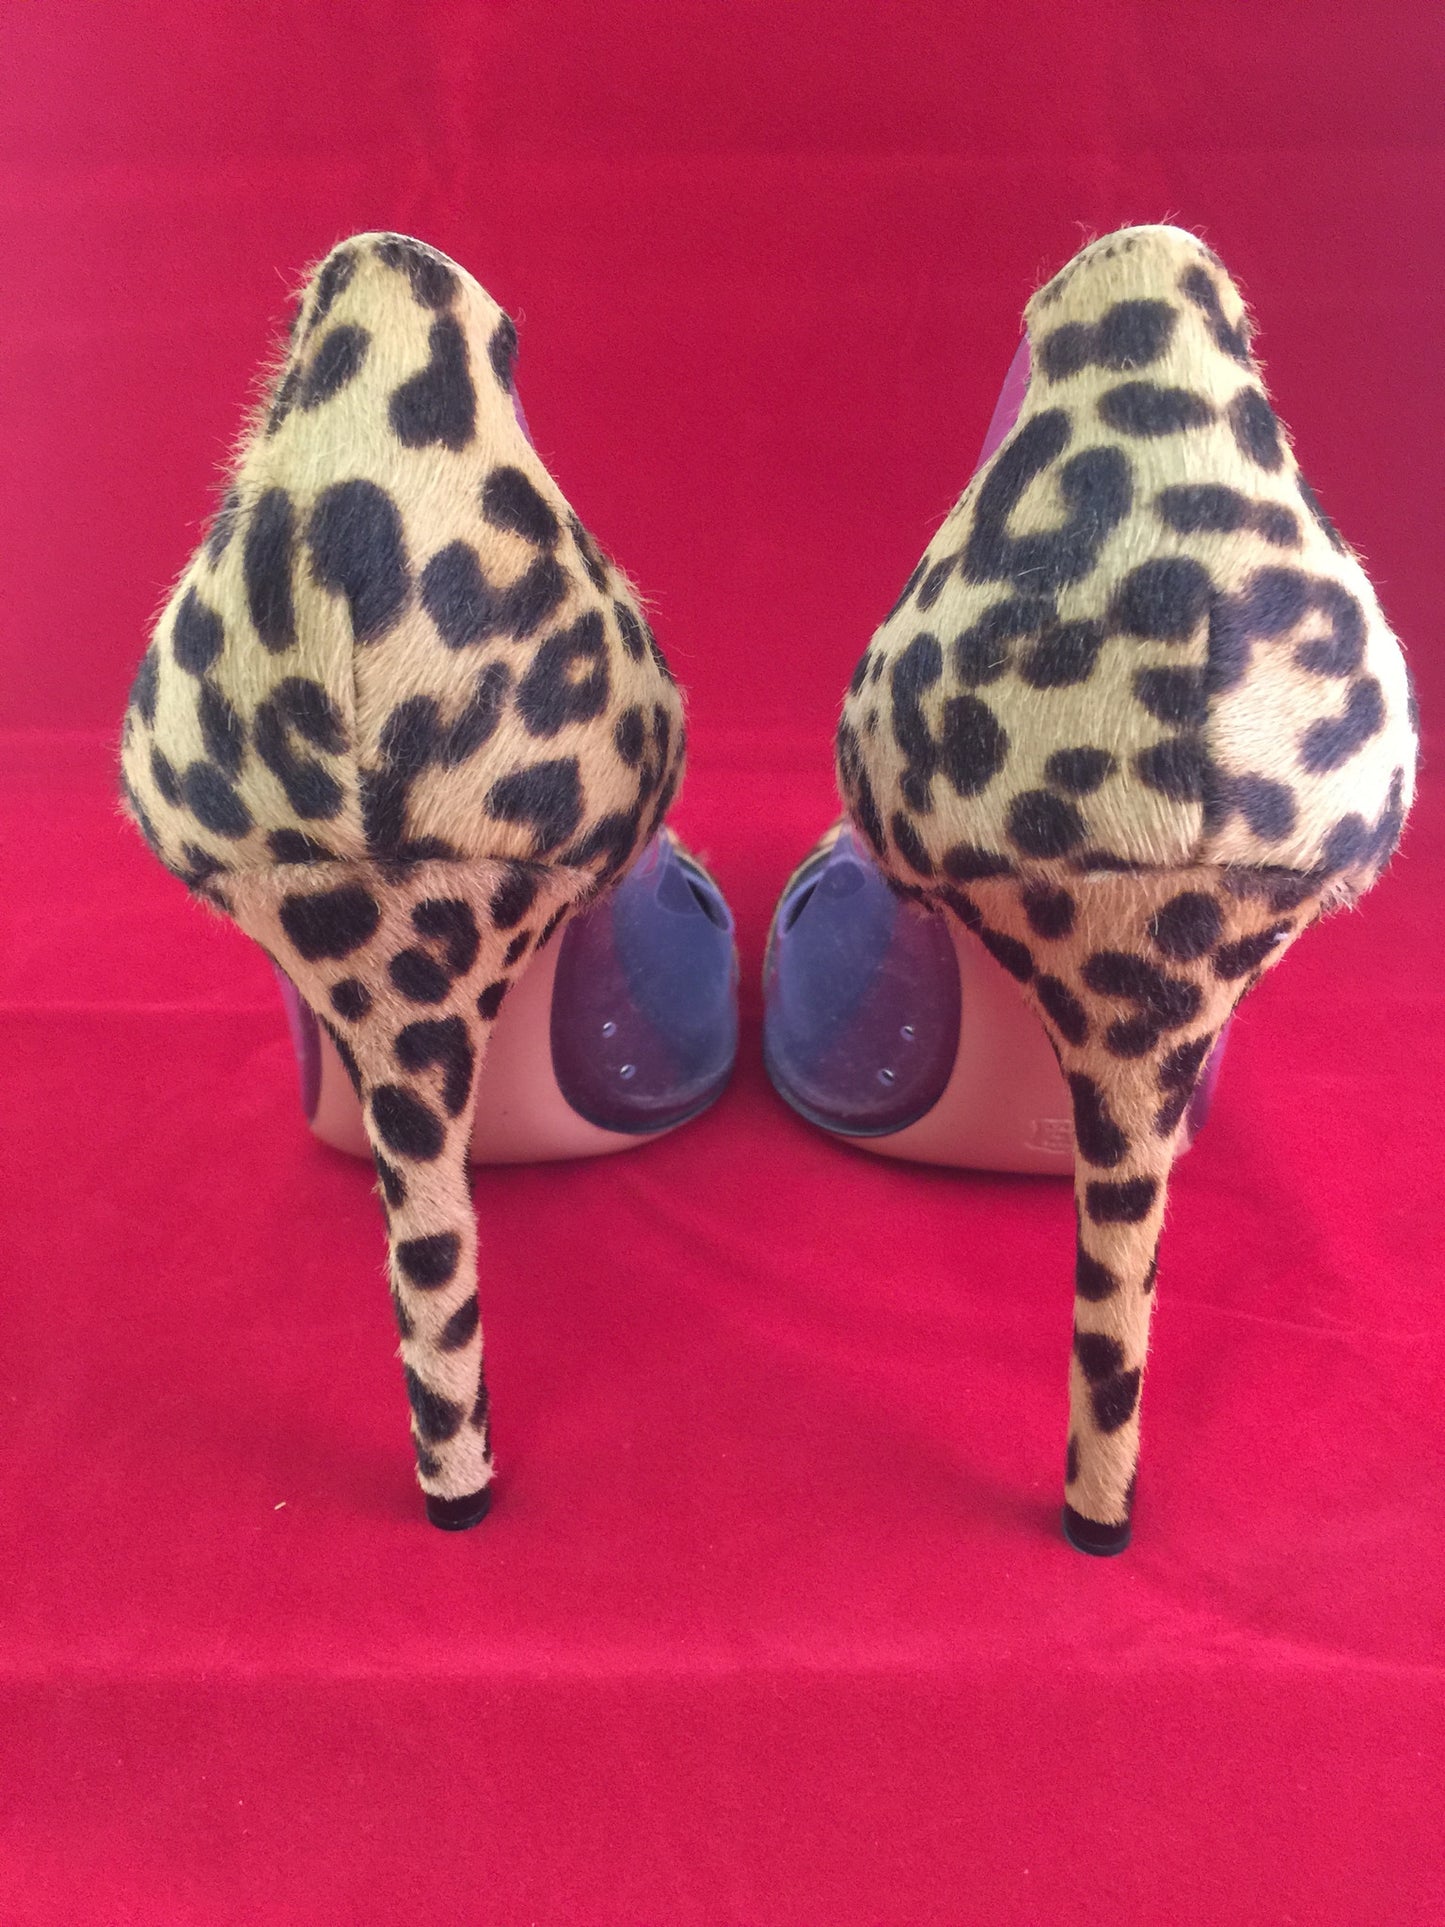 GIANVITO ROSSI 100 LEOPARD PONY HAIR CLASSIC PVC TRANSPARENT PUMPS SHOES WORN INDOORS